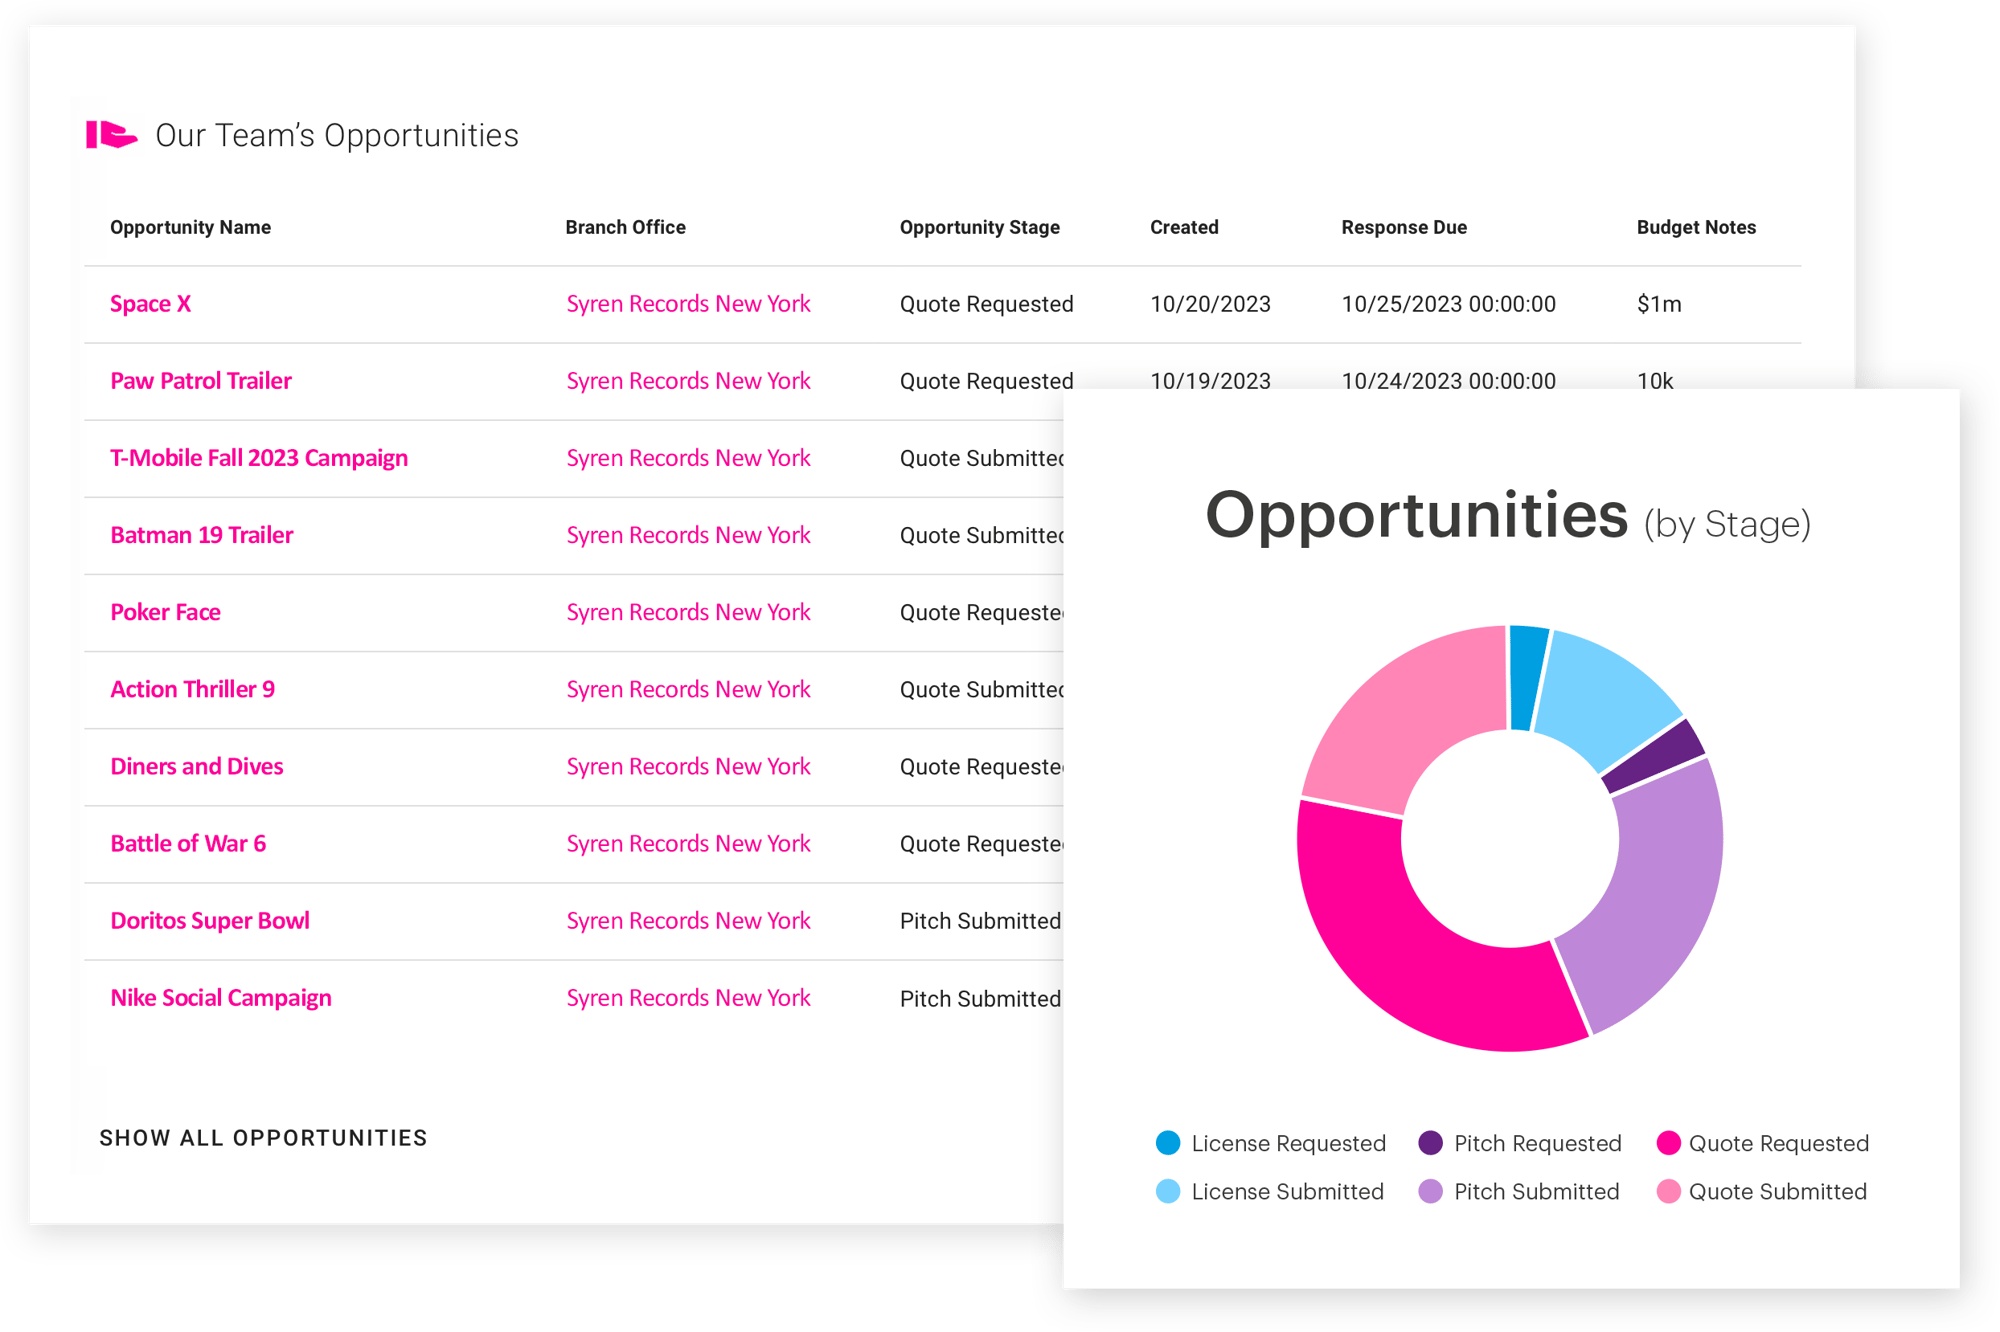 Our team's opportunities